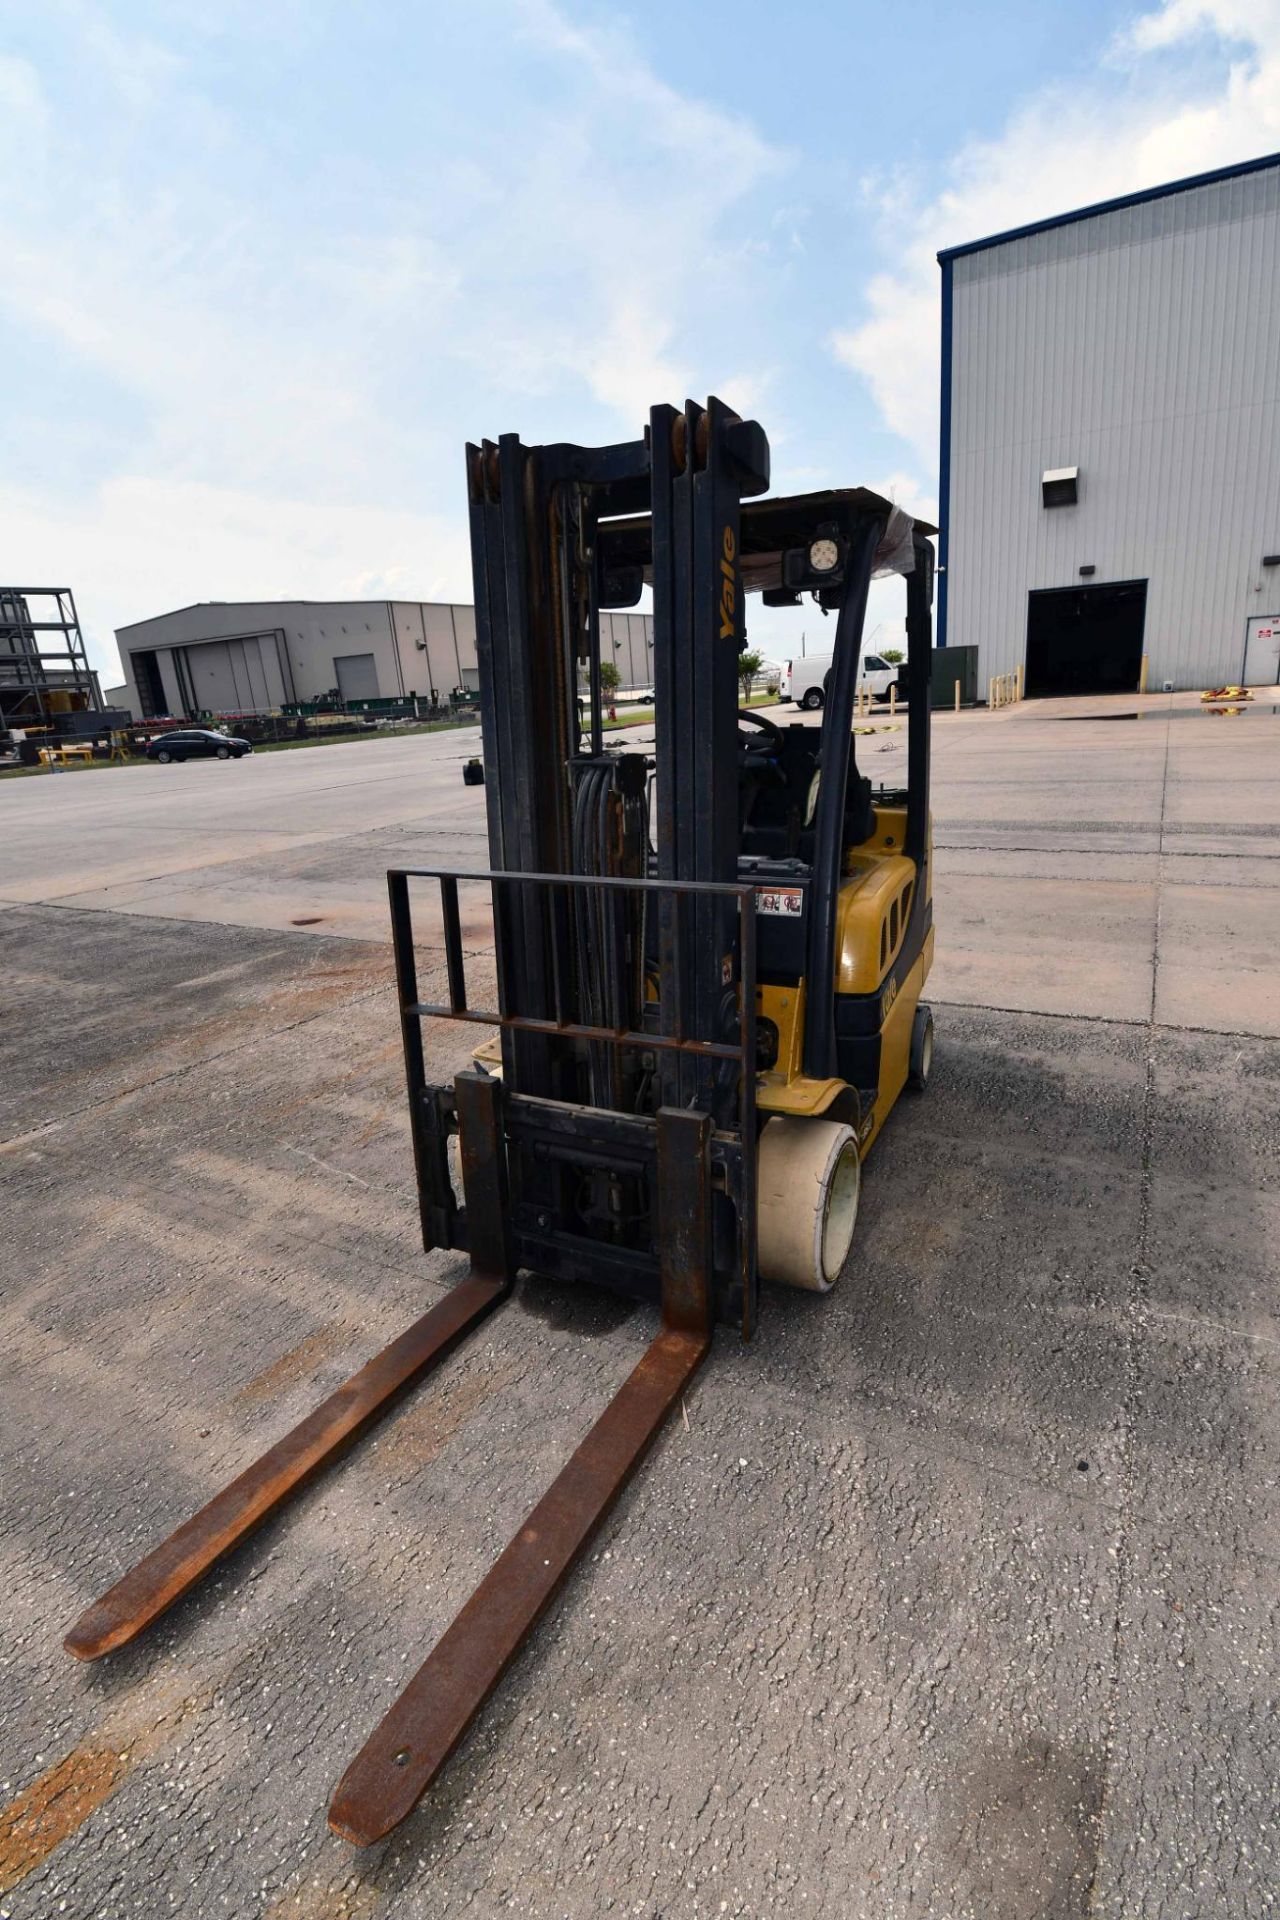 FORKLIFT, YALE VERACITOR 7,000-LB. BASE CAP. MDL. GLC070VXNDSE088, LPG, 6,500-lb. cap. as equipped, - Image 2 of 5